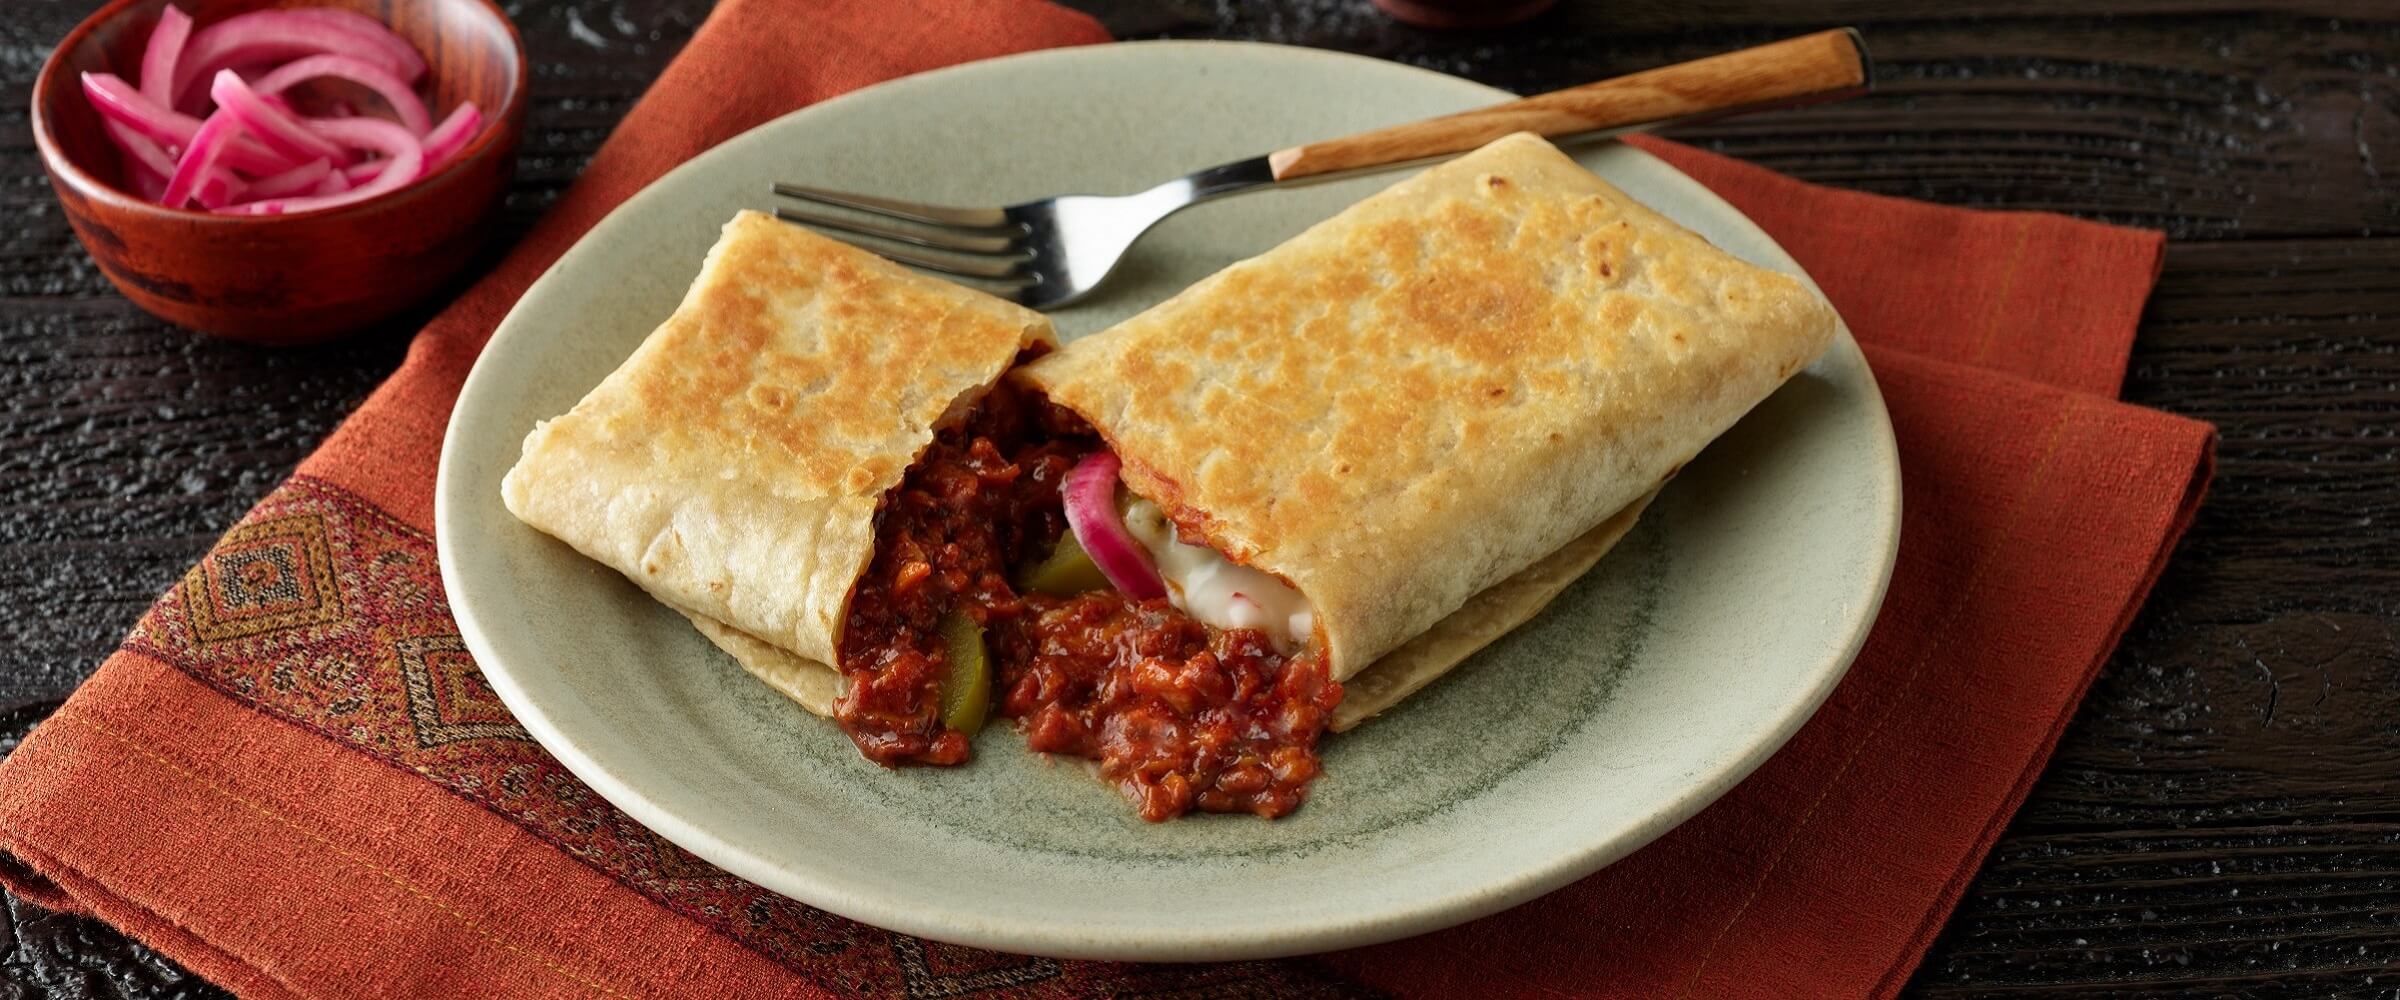 BBQ pork burrito on plate on orange napkin with side of red onions